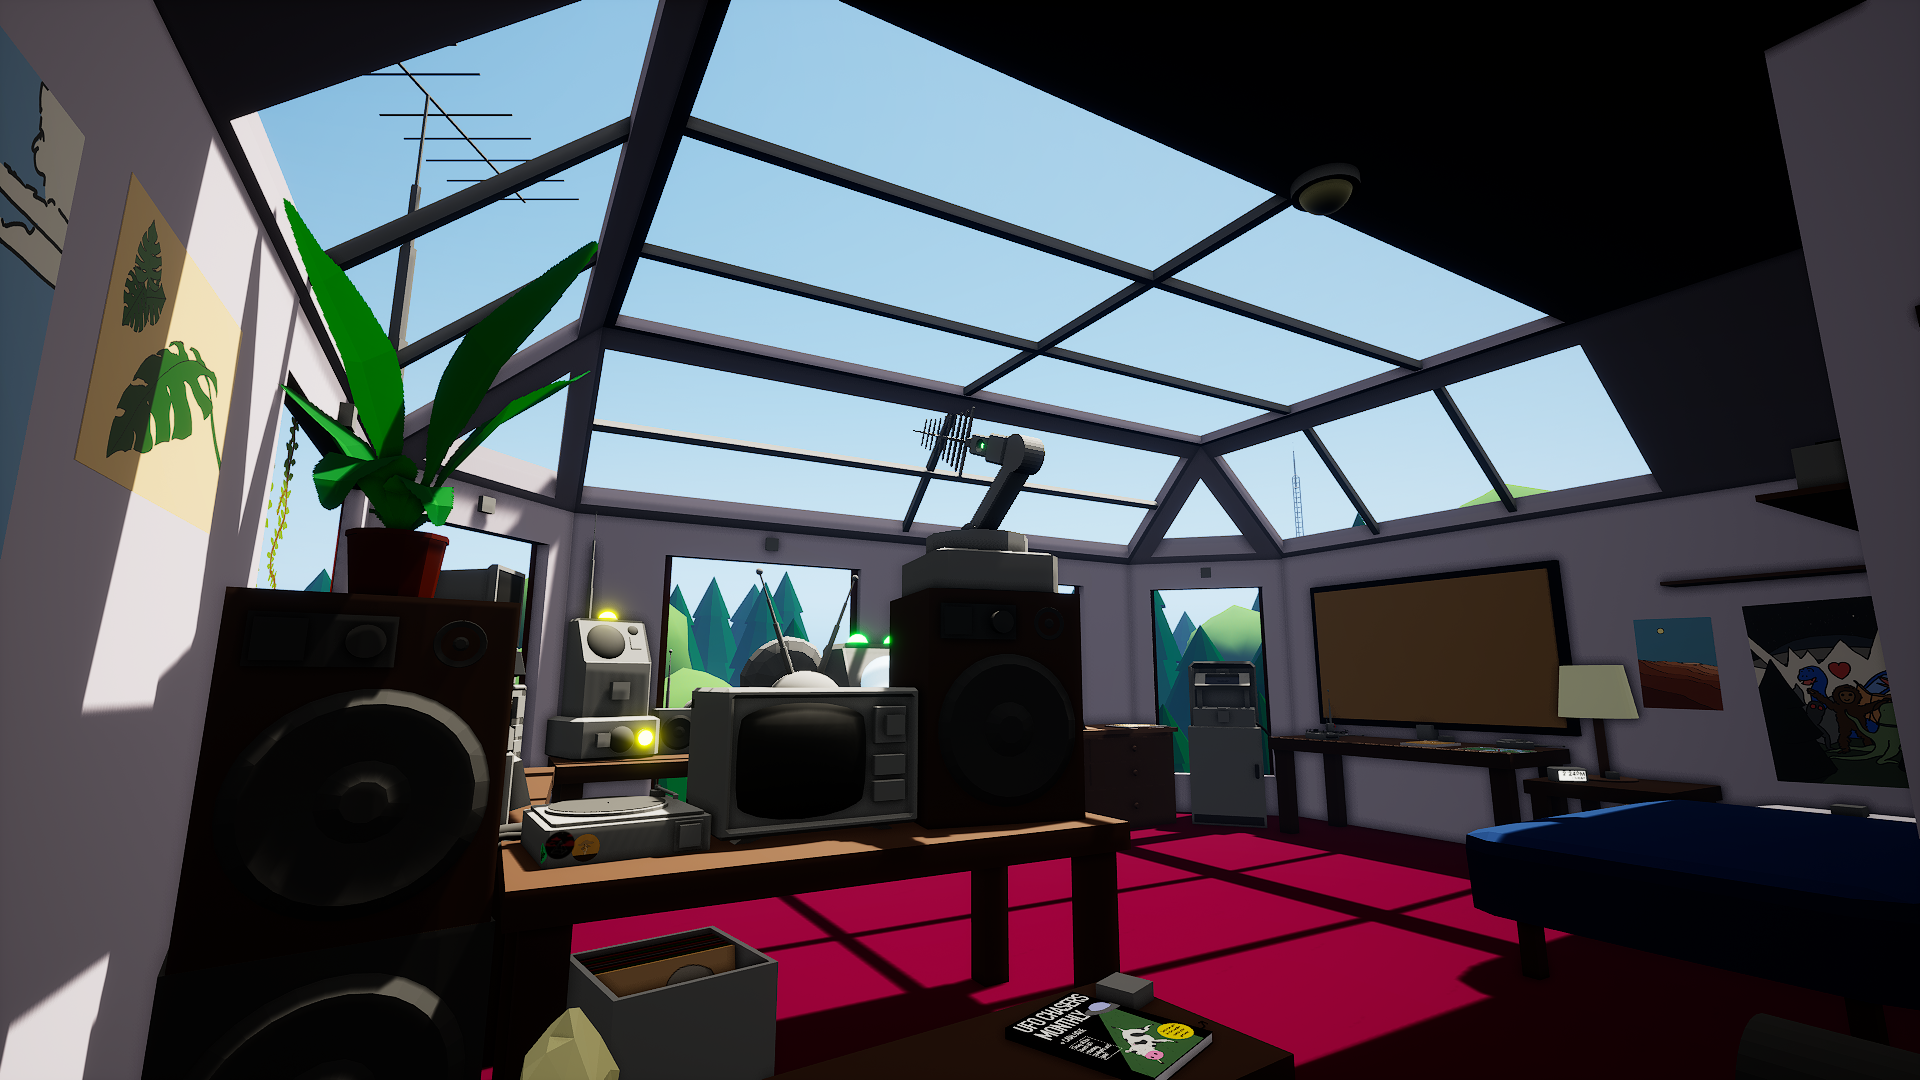 Screenshot from the back of the main cabin room